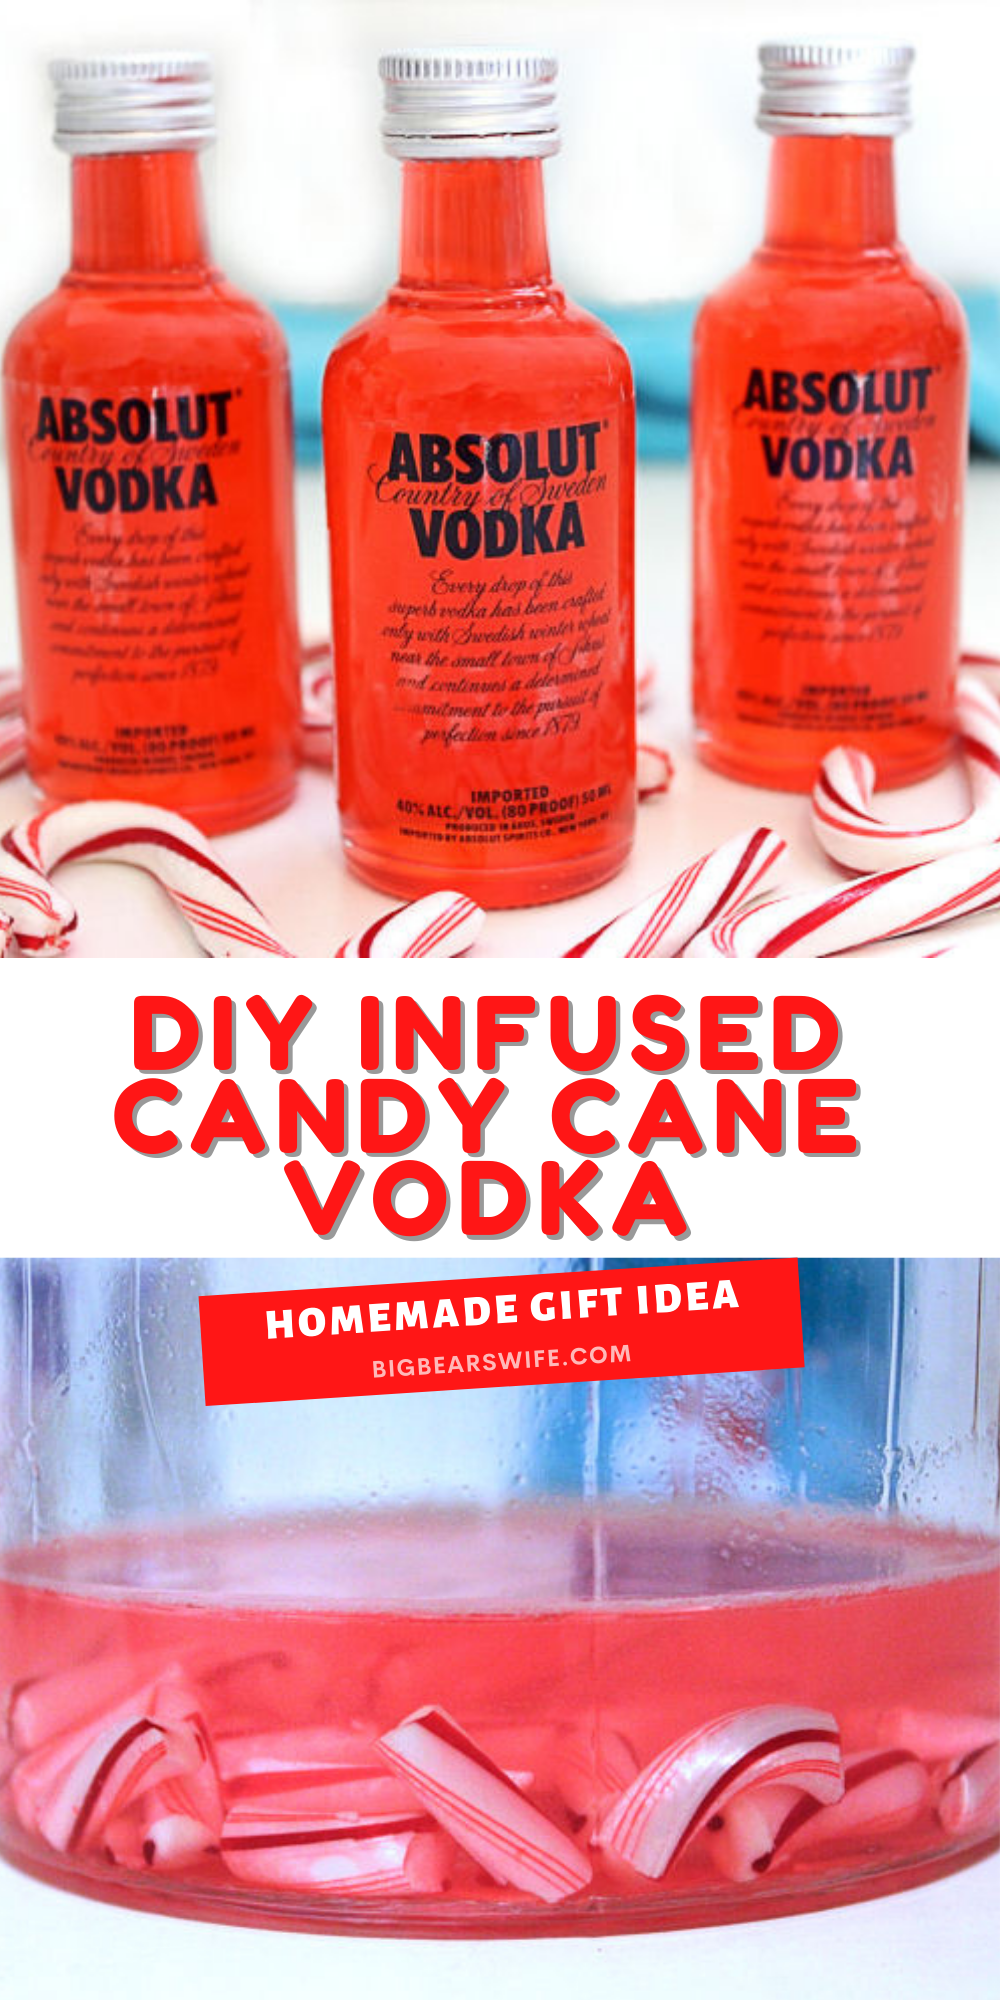 This infused Candy Cane Vodka is perfect to make for friend and family for Christmas! I love making these little bottle as gifts and as stocking stuffers for adult friends and family members.  via @bigbearswife